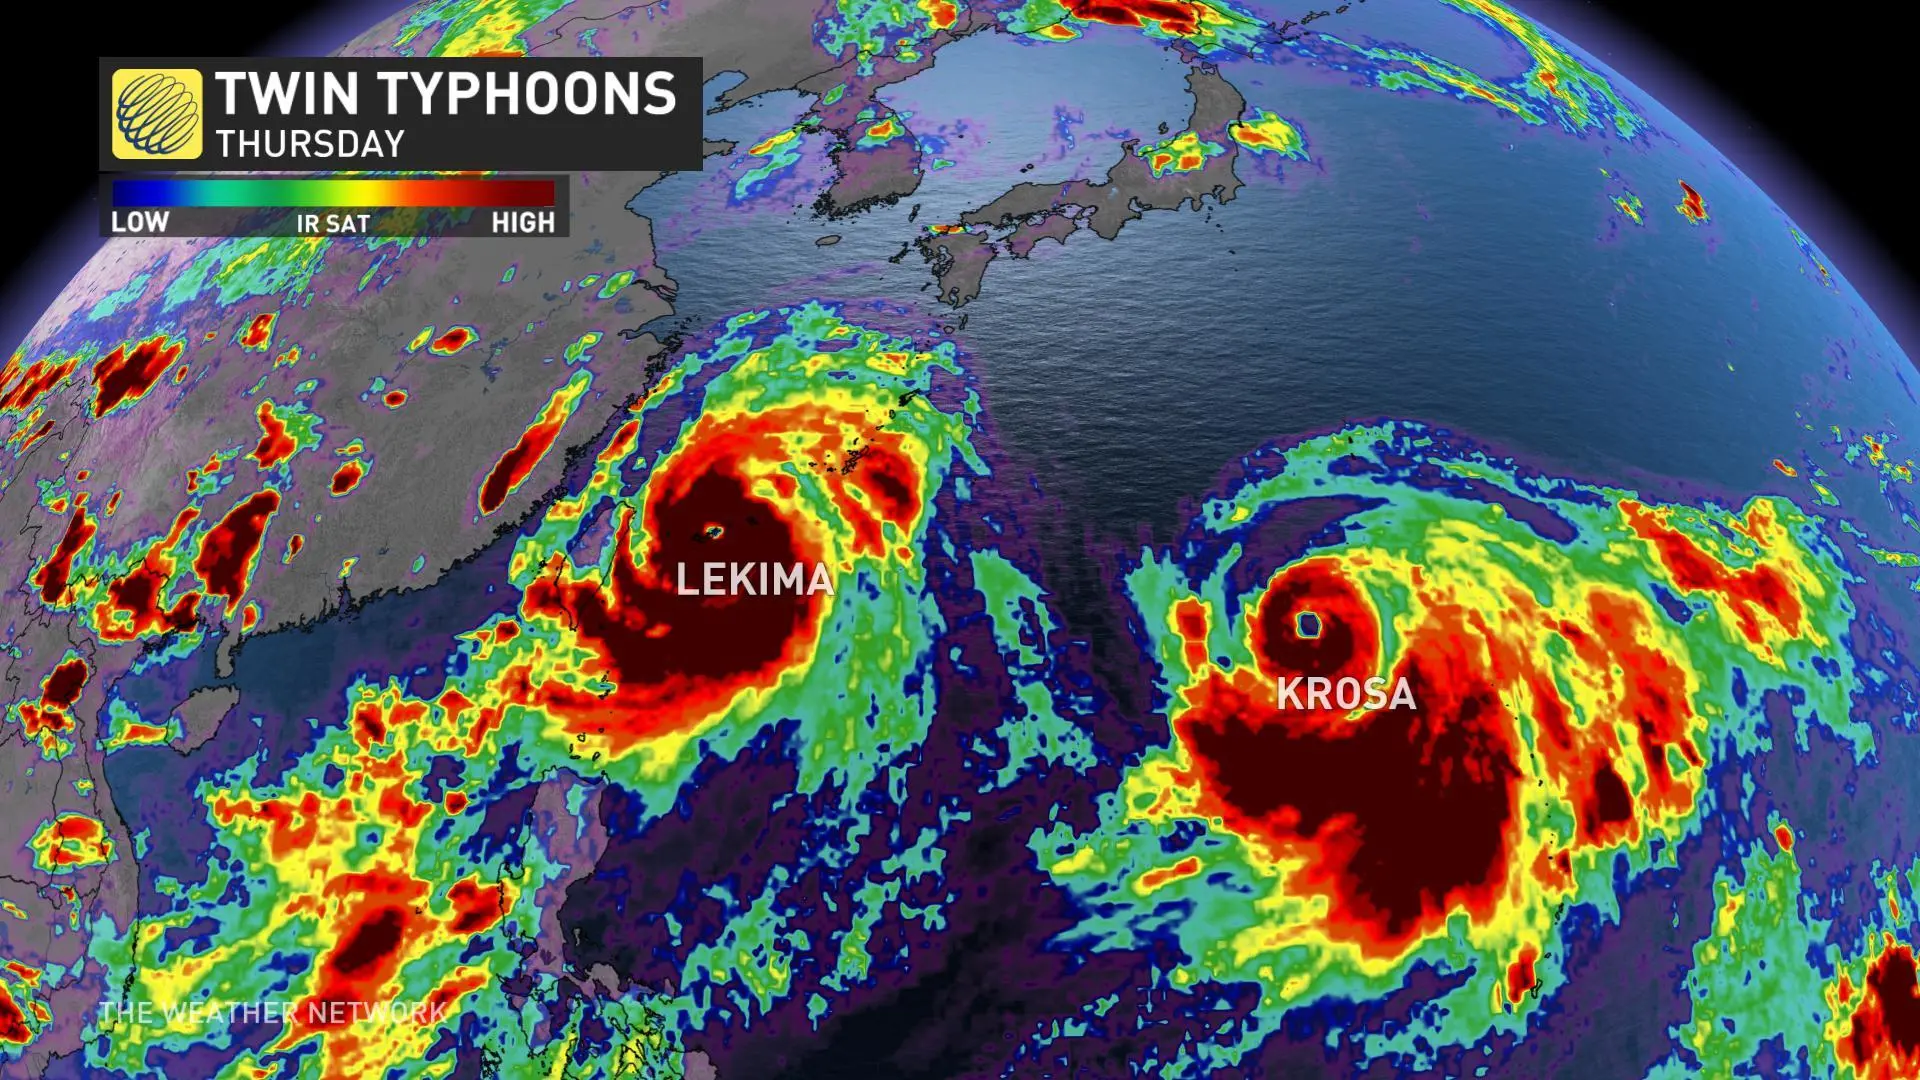 Rare scenario plays out as twin typhoons target Asia